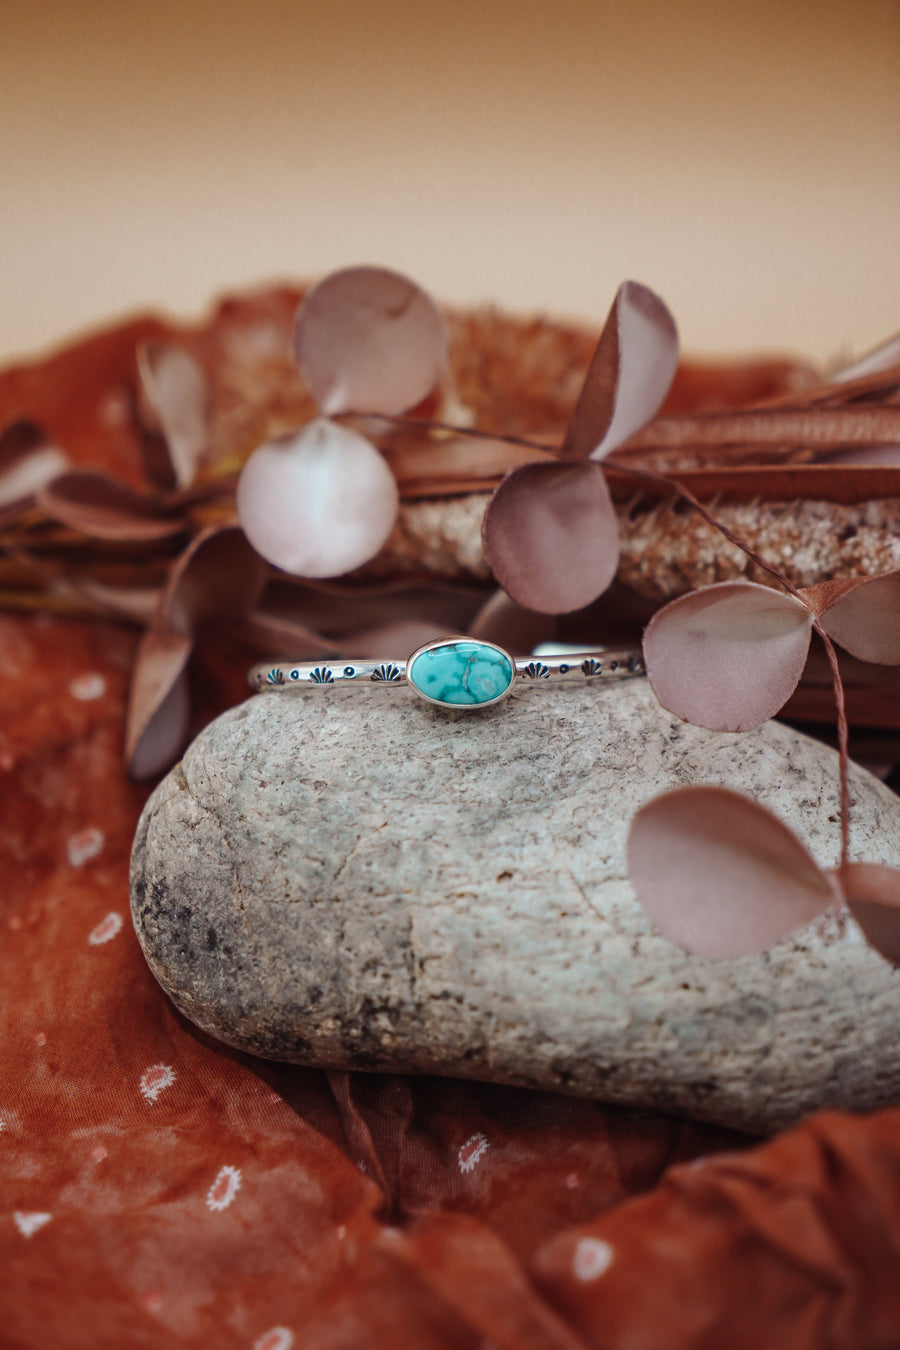 Stacking Cuff in Whitewater Turquoise